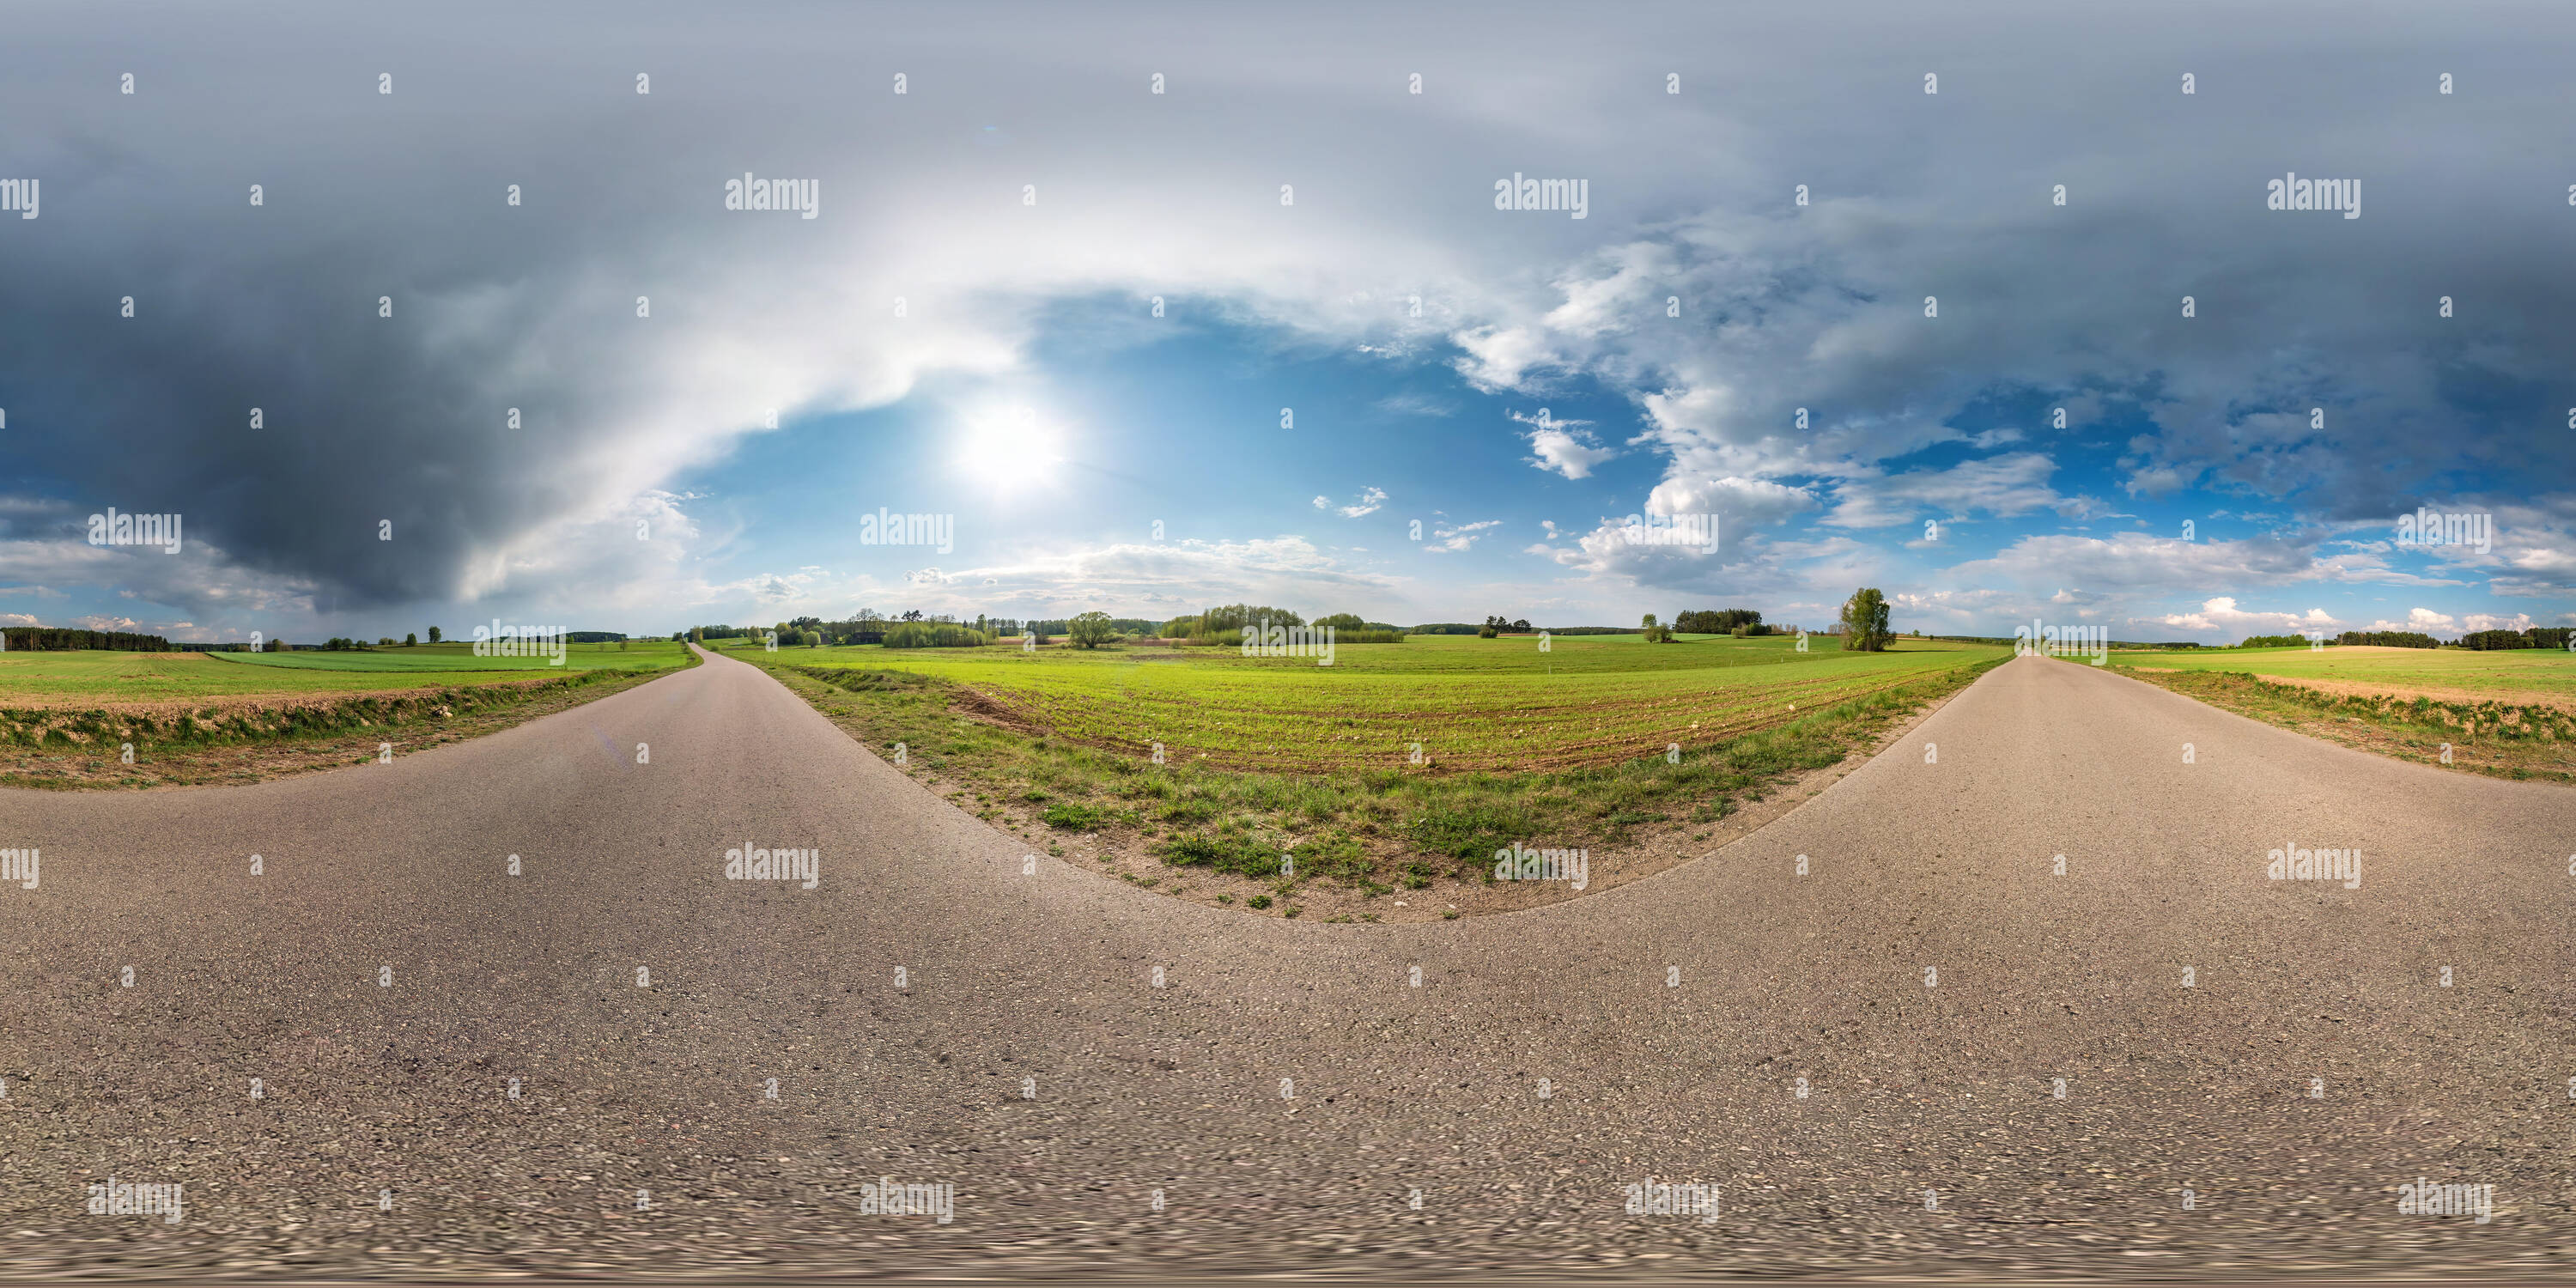 360 degree panoramic view of Full spherical seamless panorama 360 degrees angle view on no traffic asphalt road among alley and fields with awesome clouds in equirectangular equid